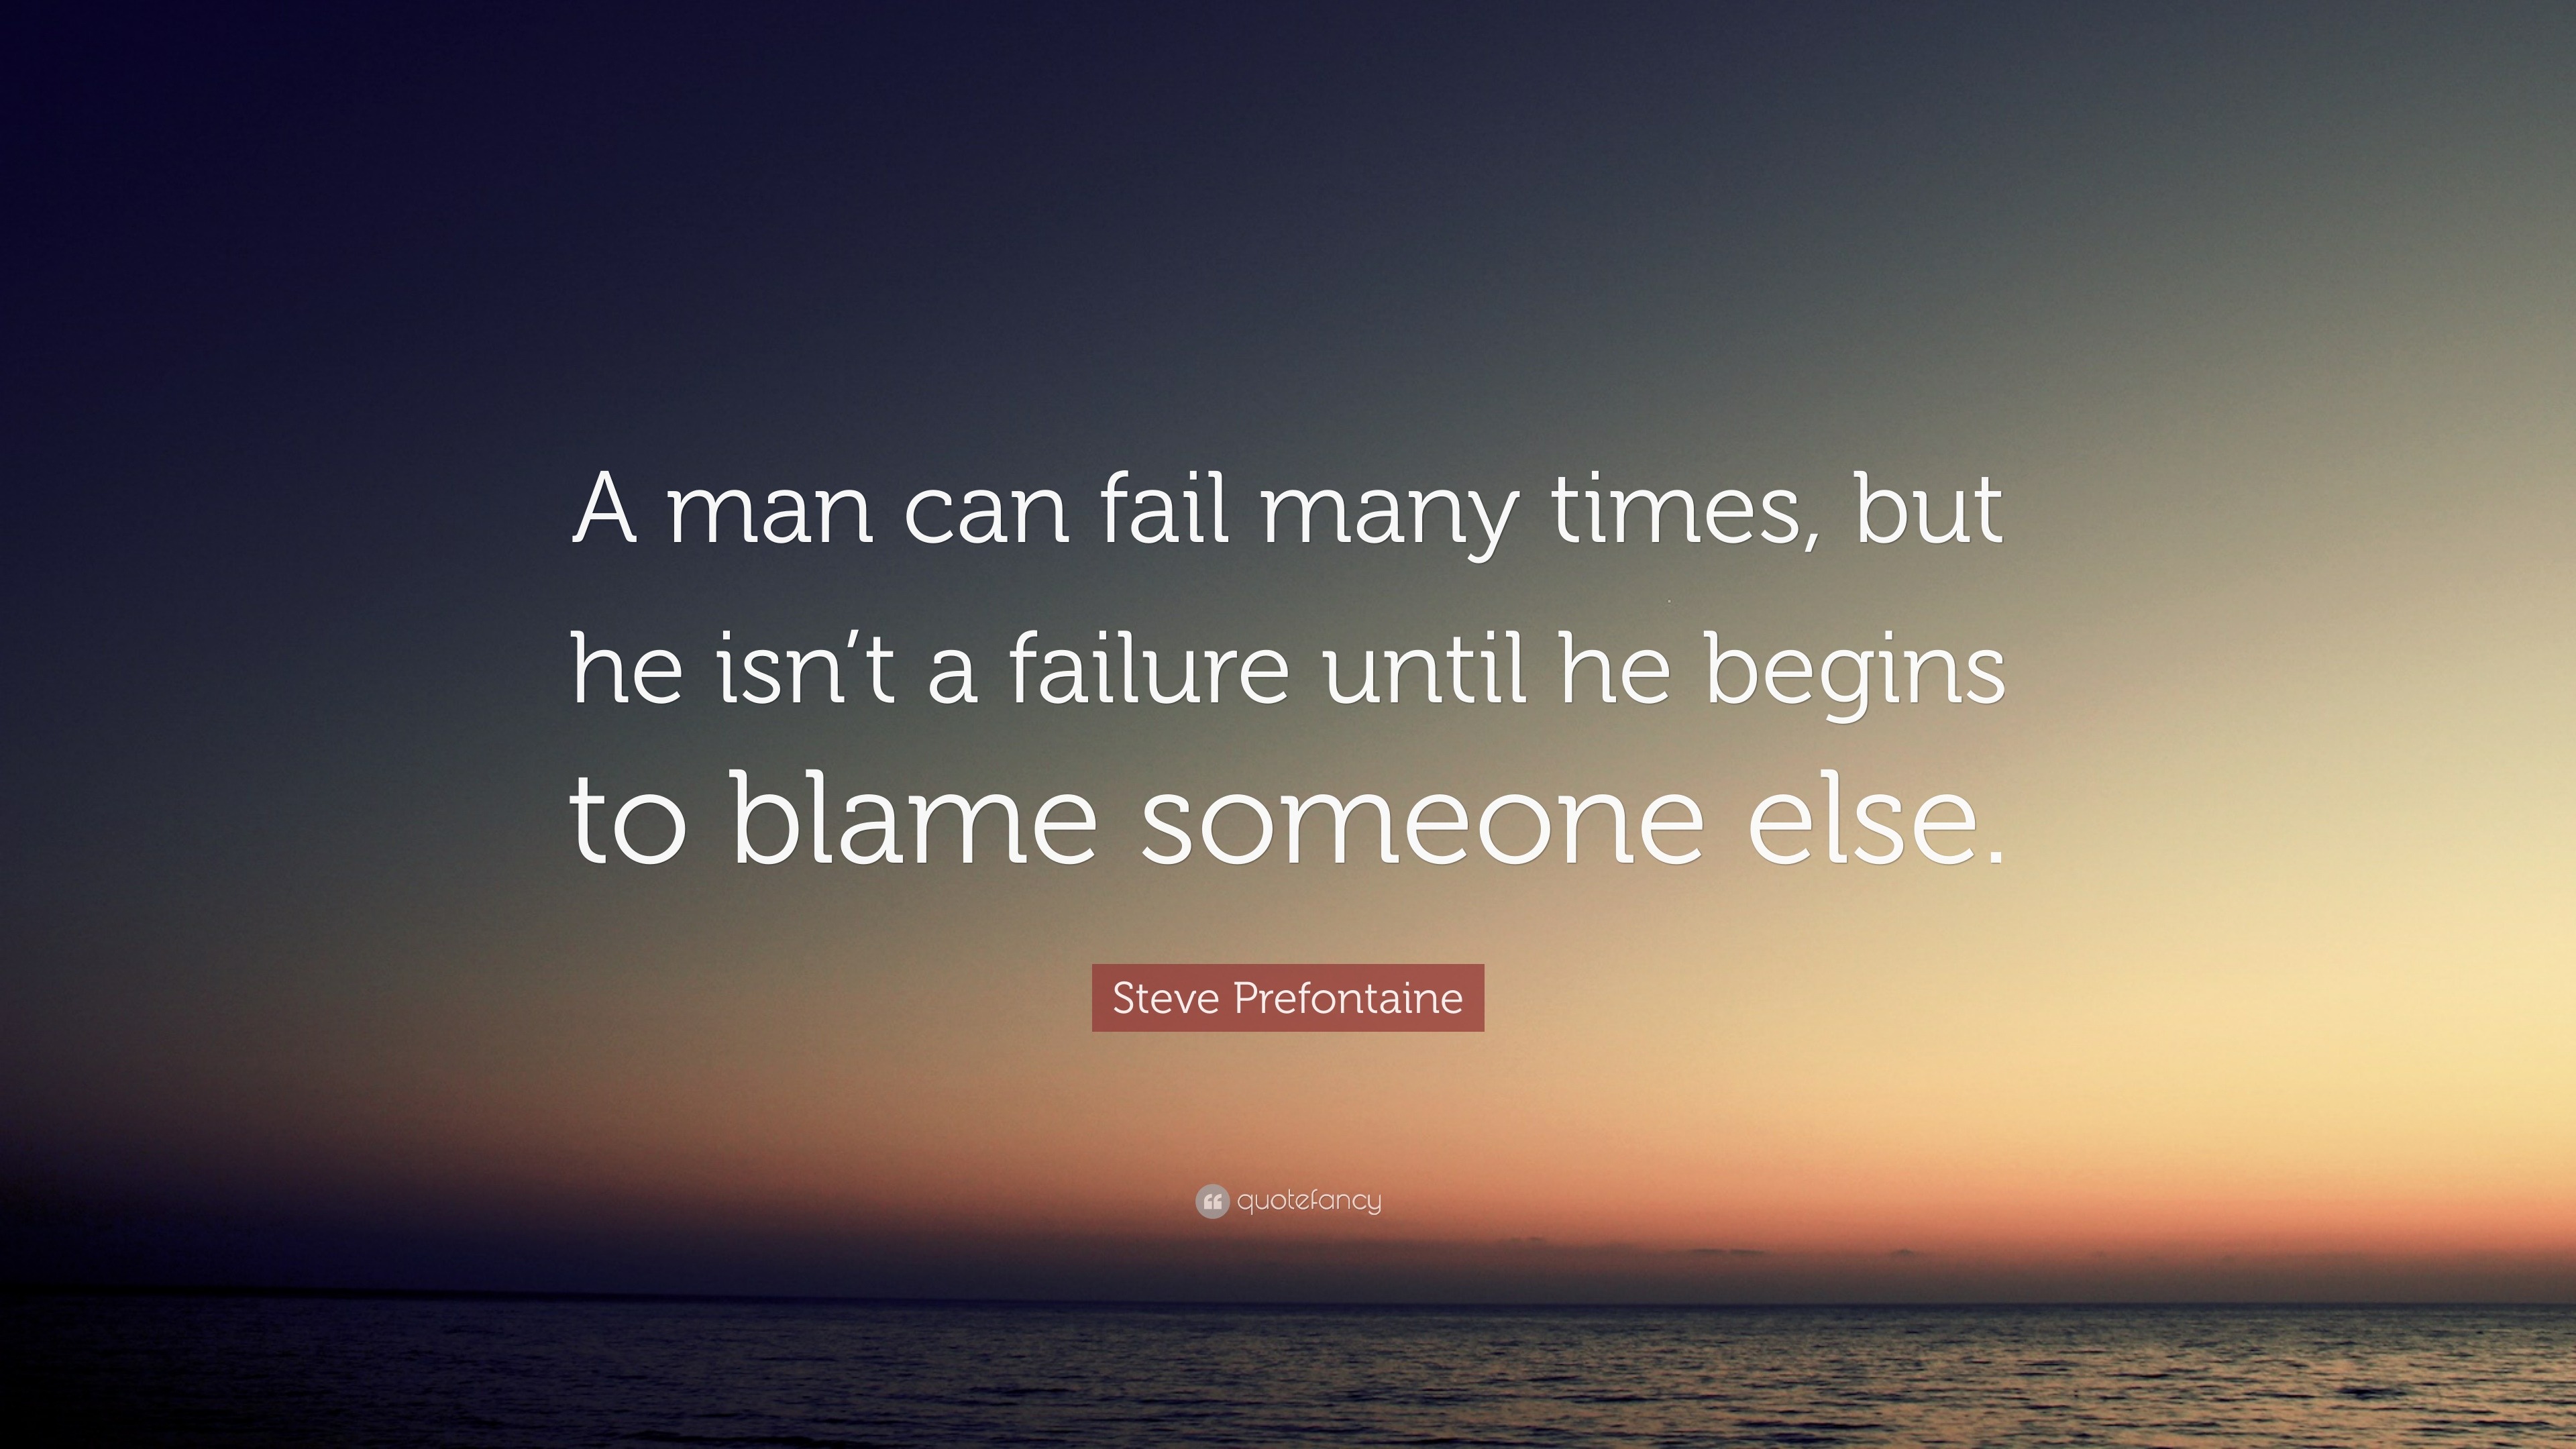 Steve Prefontaine Quote: “A man can fail many times, but he isn’t a